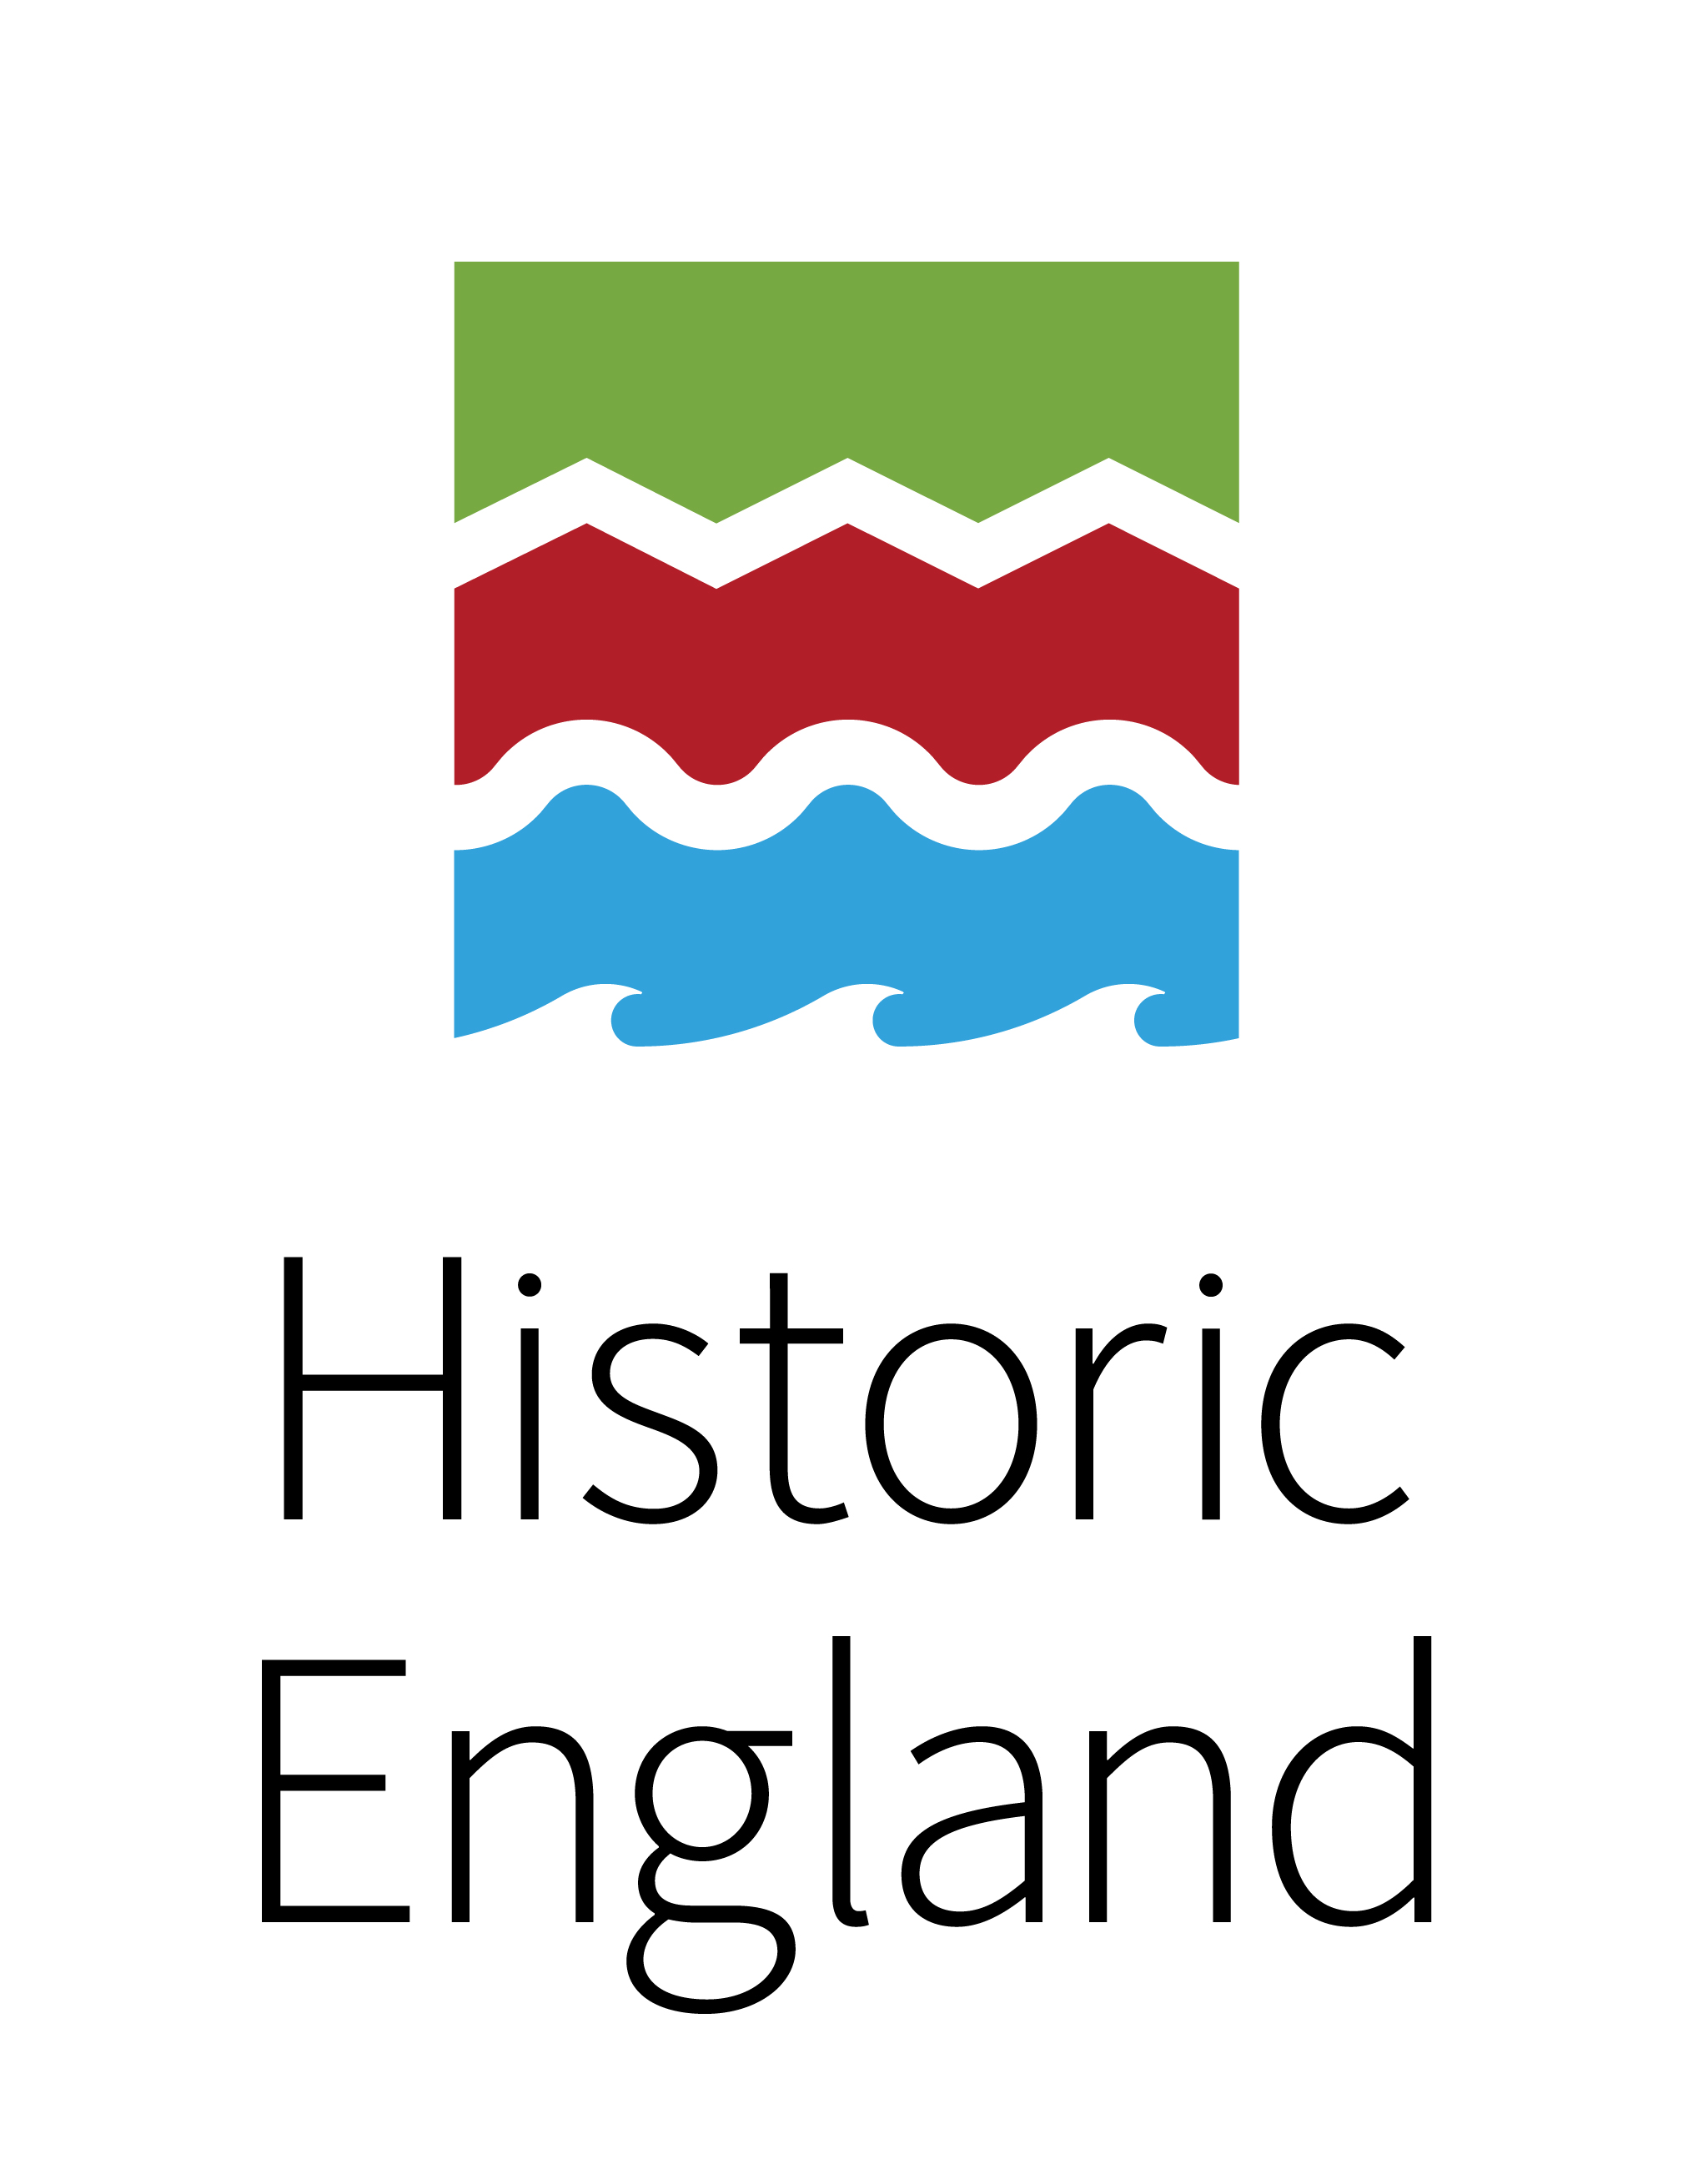 The Historic England logo showing a landscape silhouette in red, blue, and green.